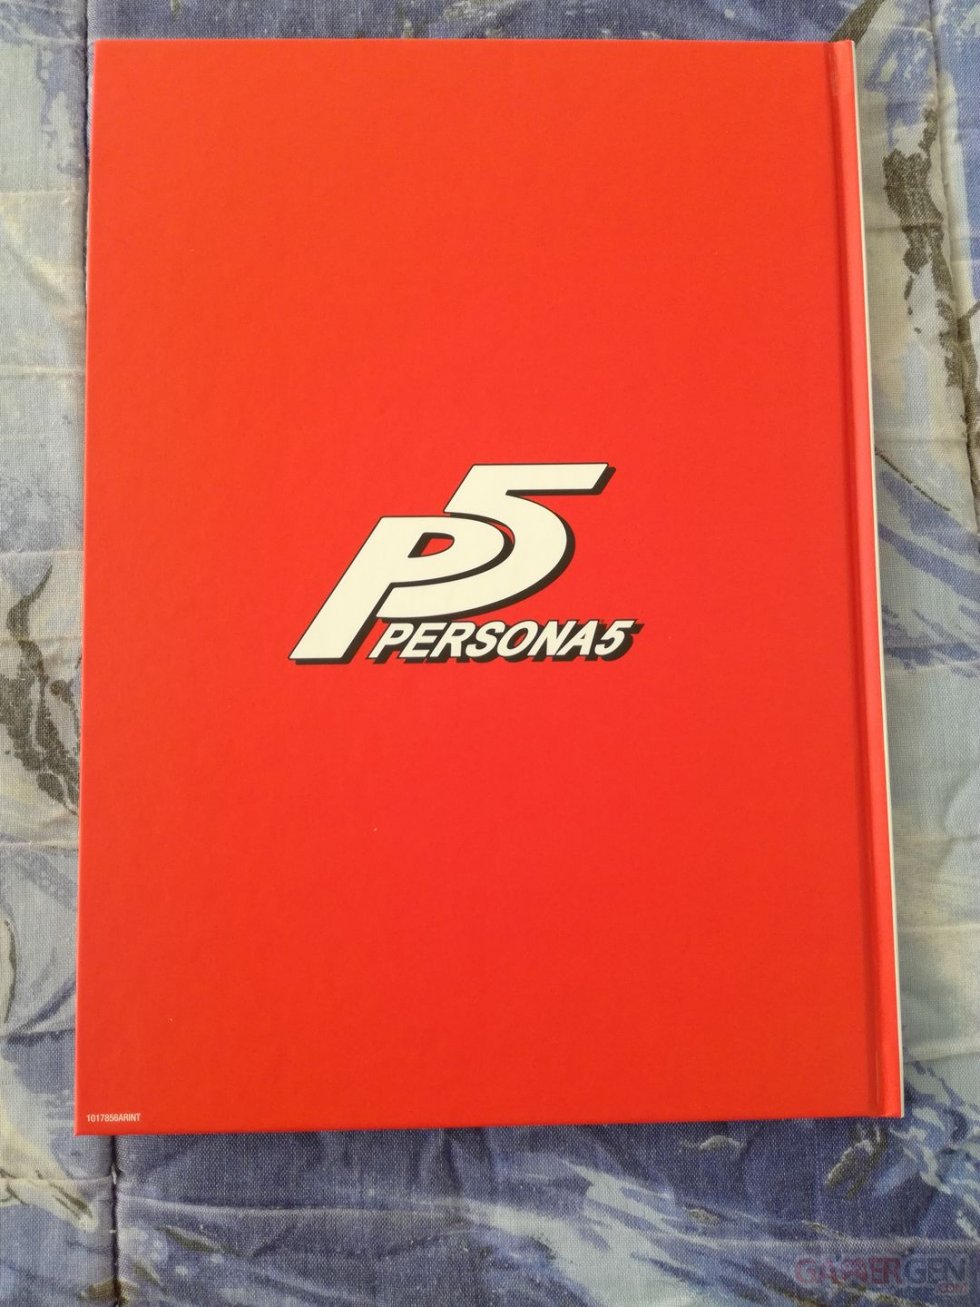 Persona-5-P5-collector-Take-Your-Heart-Premium-Edition-unboxing-deballage-31-04-04-2017